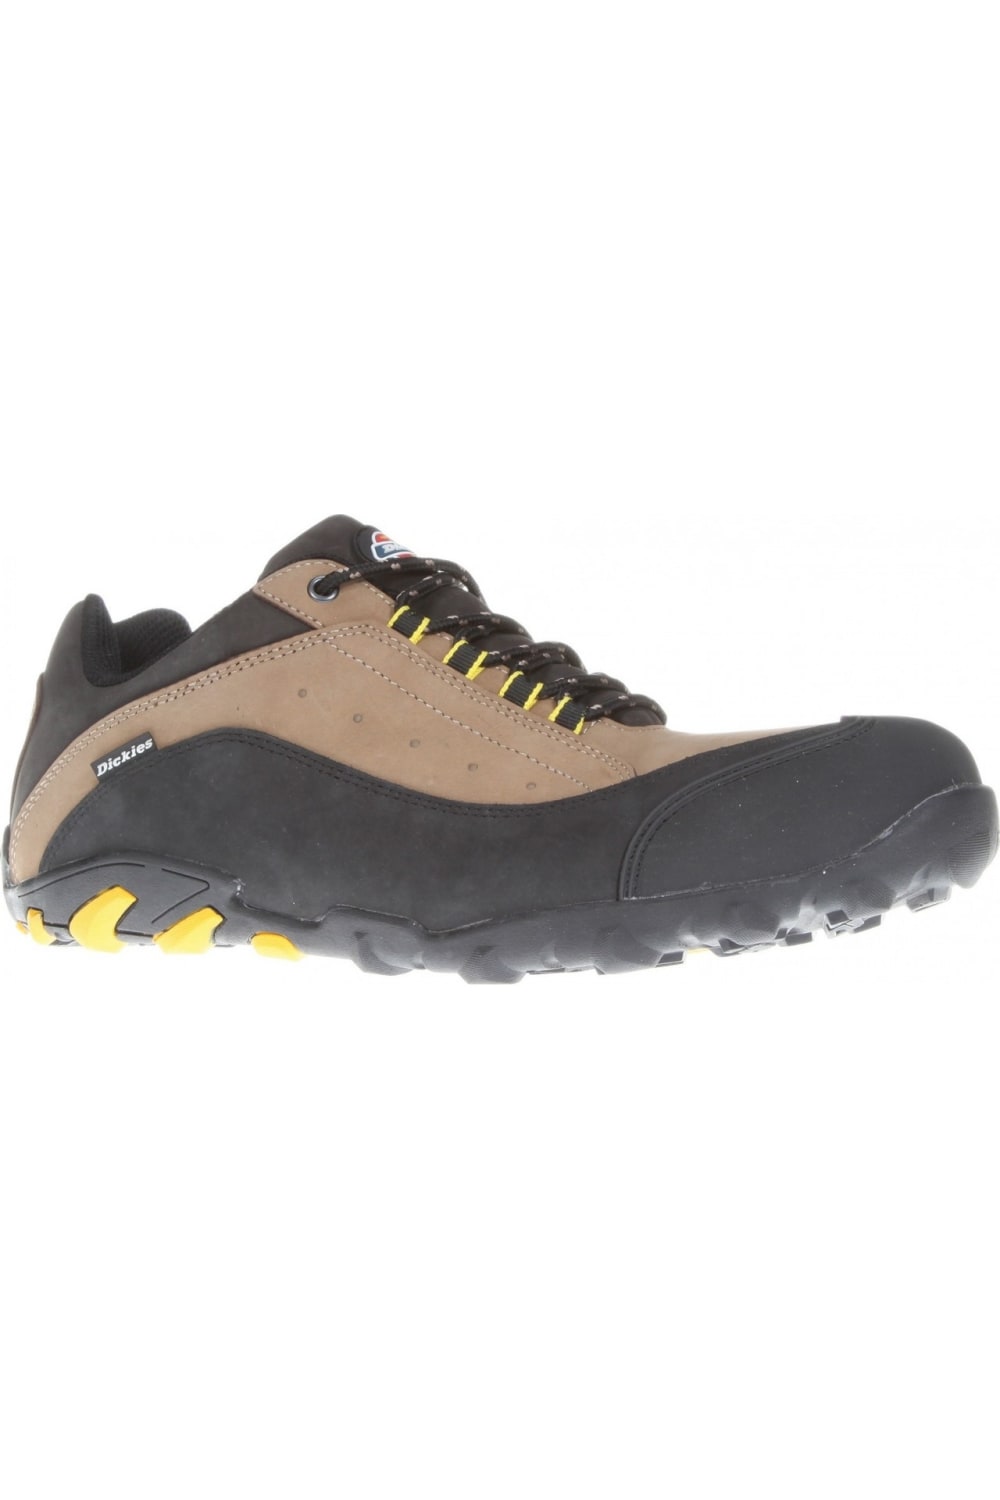 Mens Faxon Safety Trainers/Workwear - Camel/Black